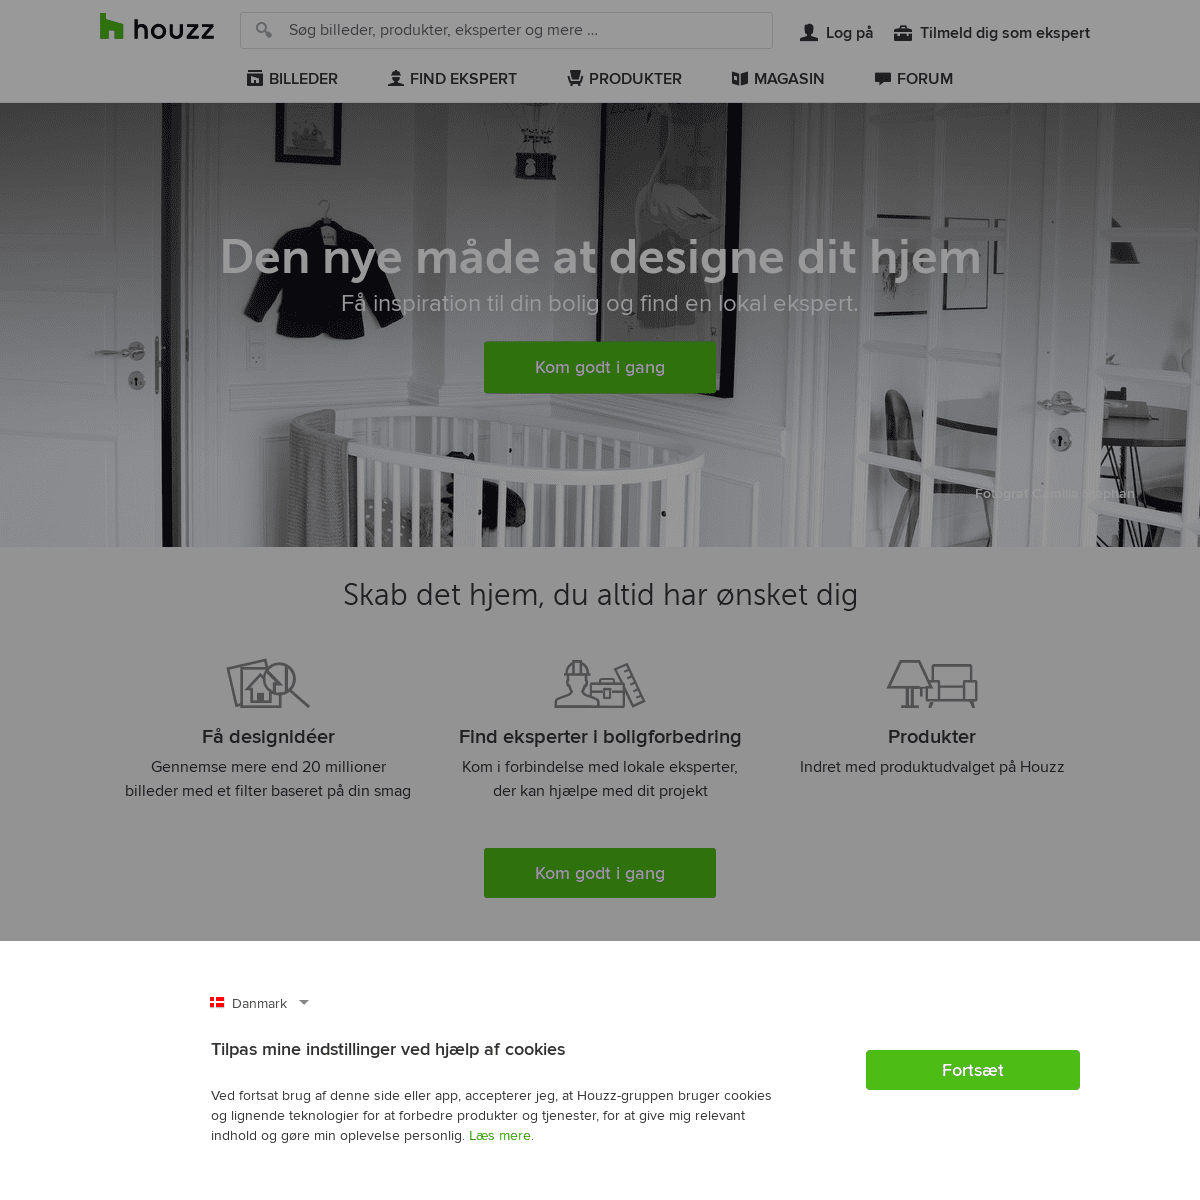 A complete backup of houzz.dk